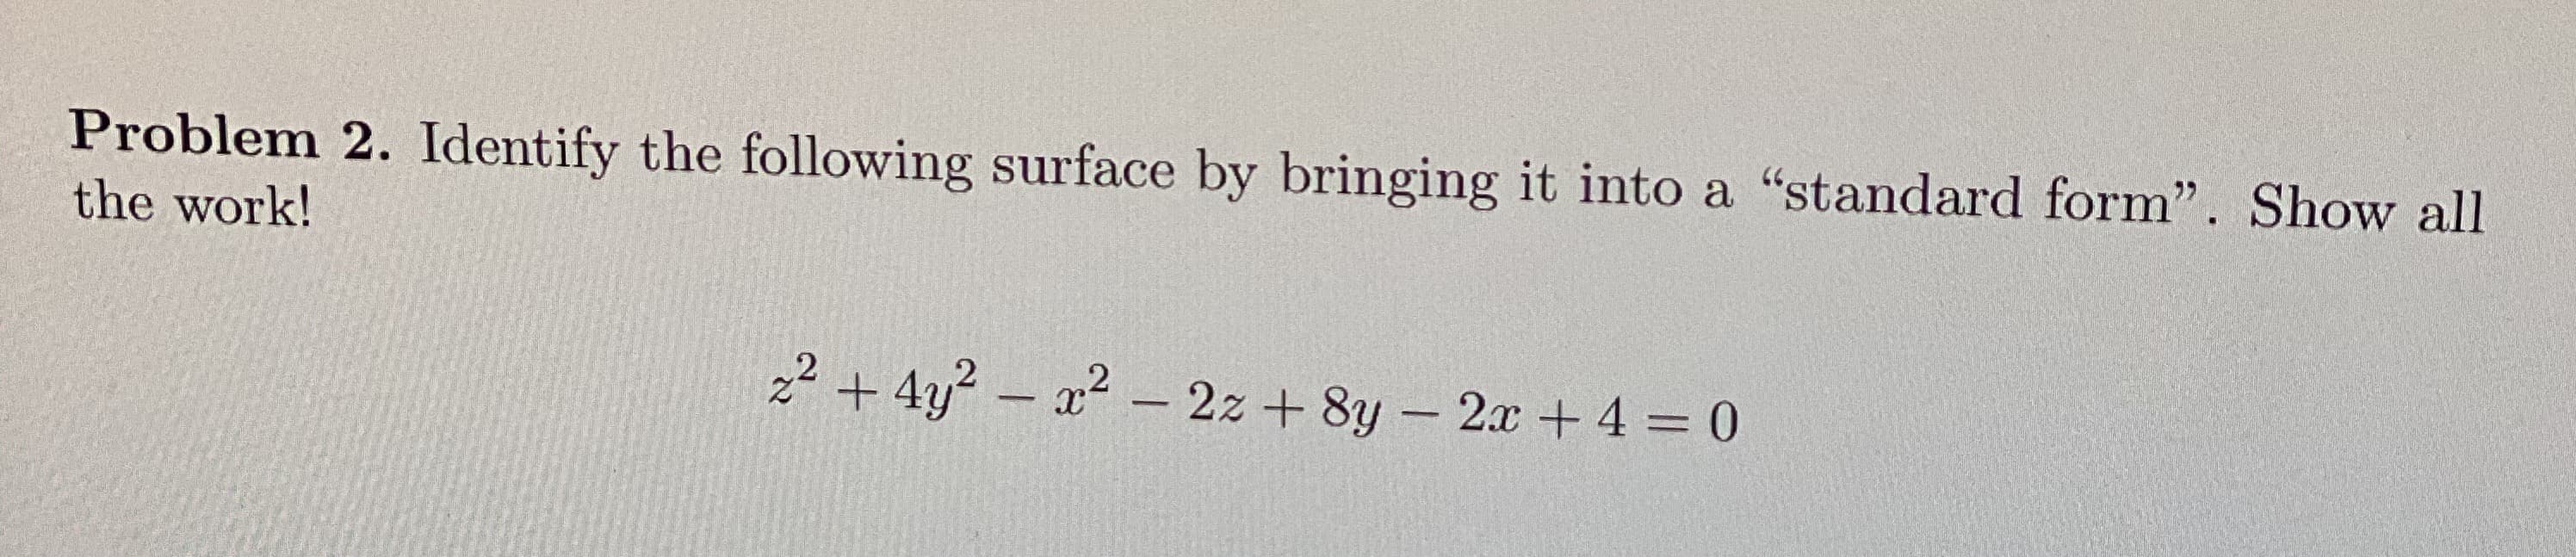 Problem 2. Identify the following surface by bringing it into a "standard form". Show all
the work!
22 + 4y? – x² – 2z + 8y - 2x + 4 = 0
